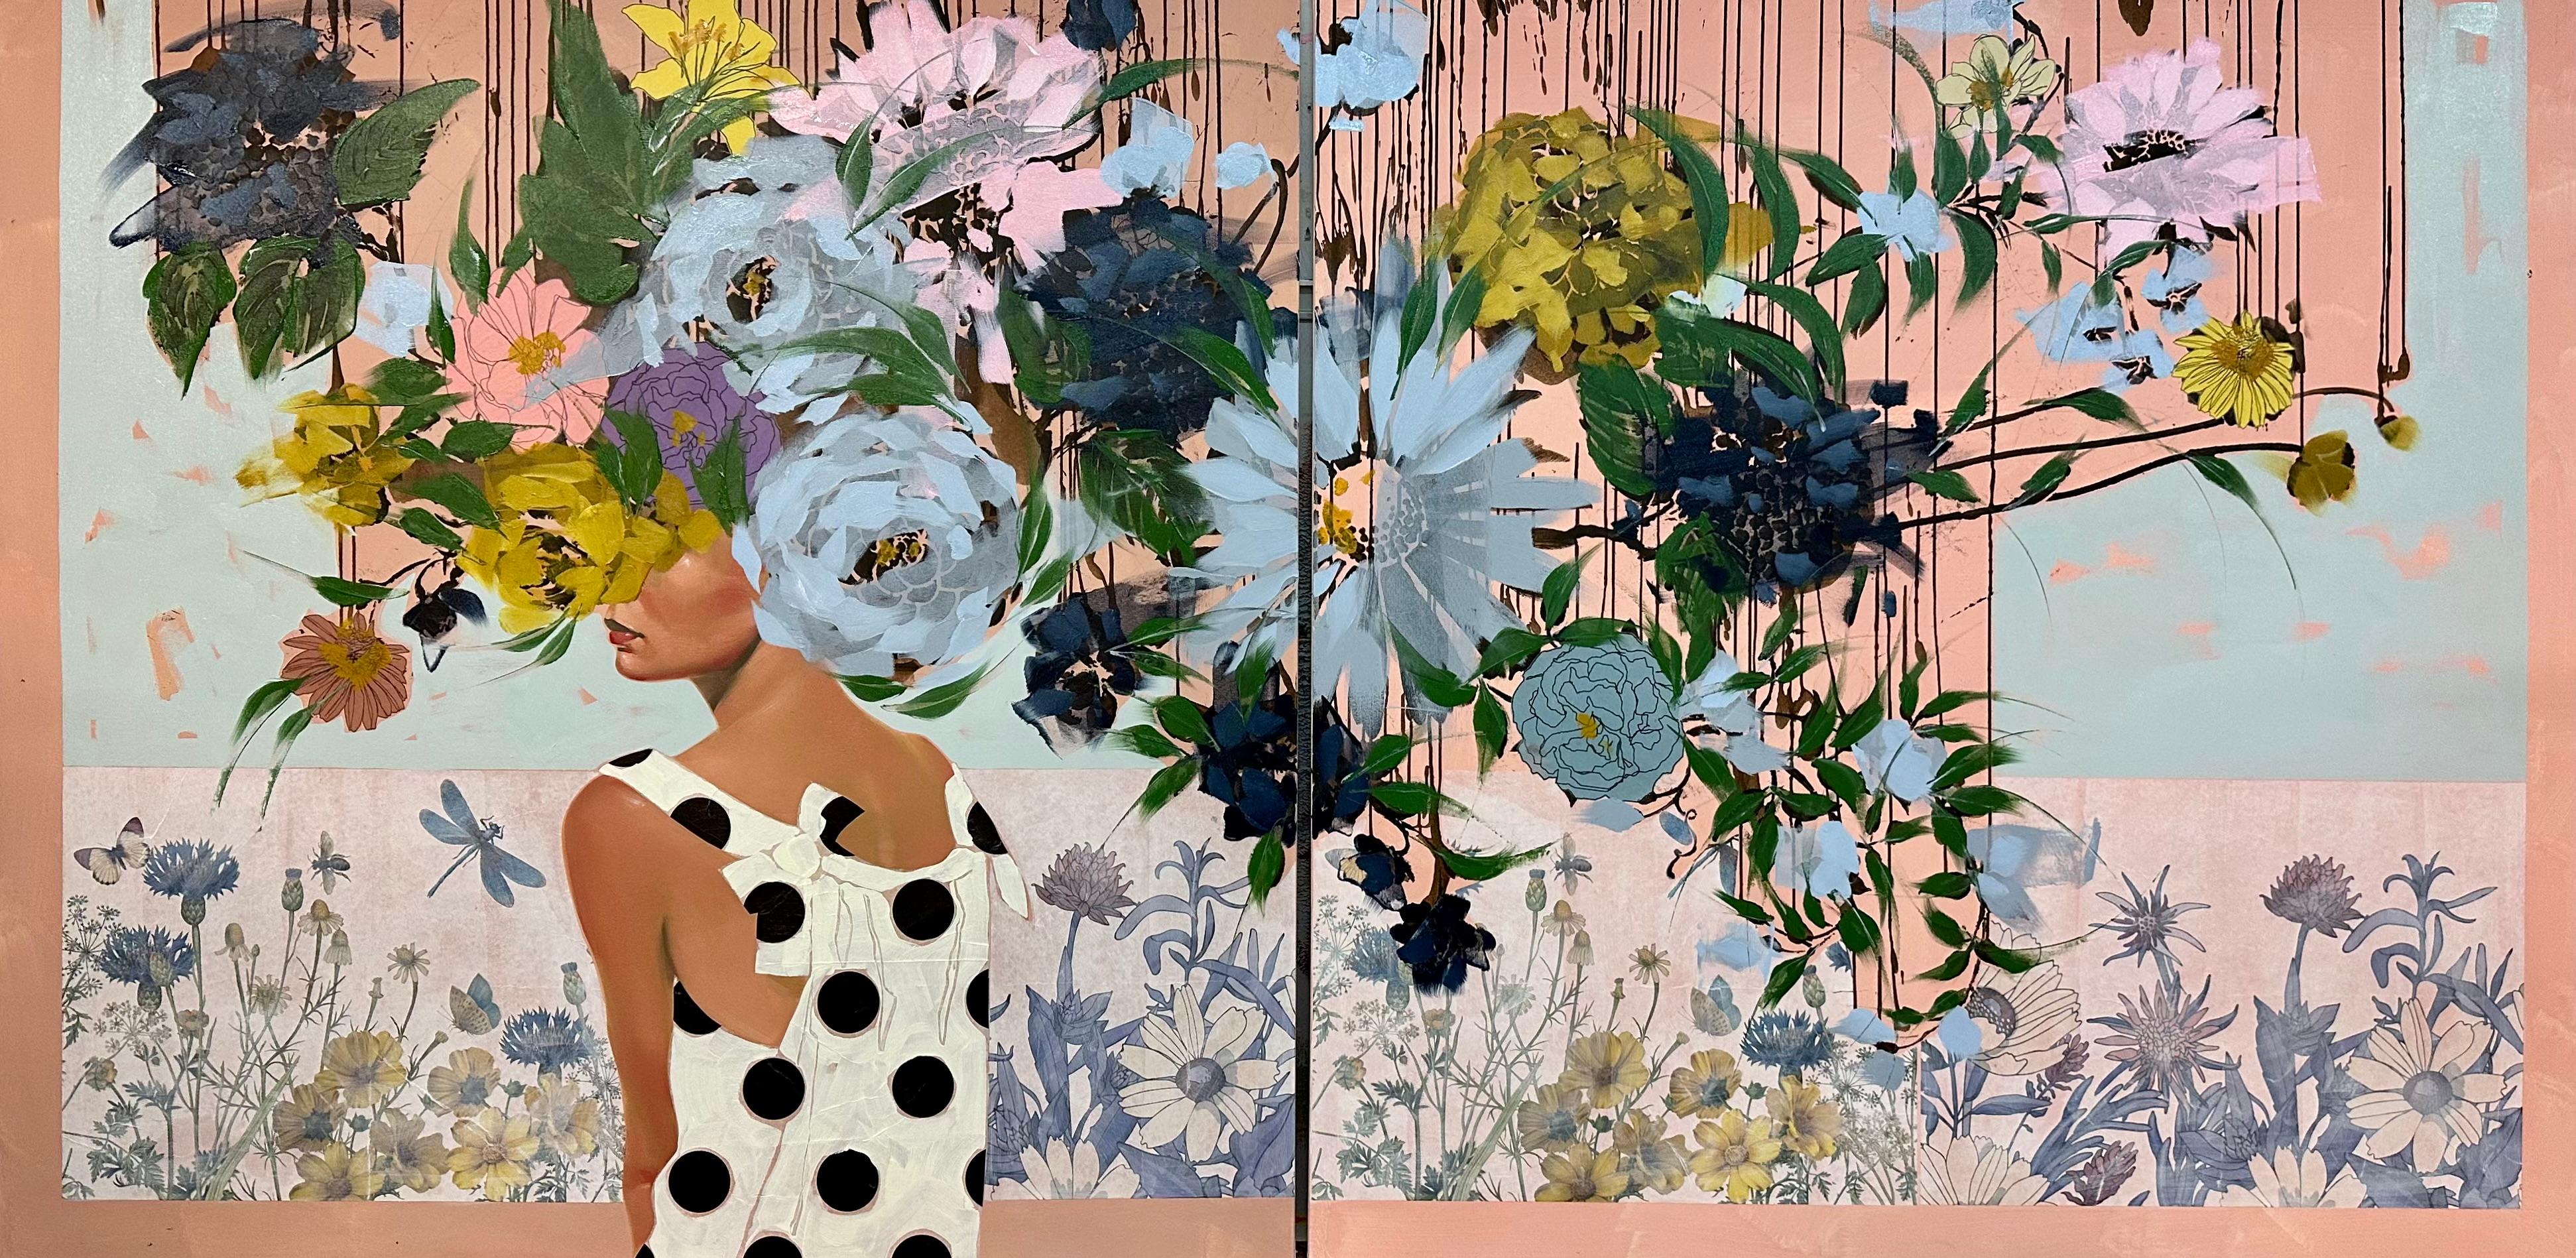 ANNA KINCAIDE
"Sounds of Summer (Diptych)"
Oil & Mixed Media on Canvas
60 x 120 inches

Communicating emotion and narrative with limited assistance from her figure’s facial expressions, Anna Kincaide creates cascades of flowers that cover her